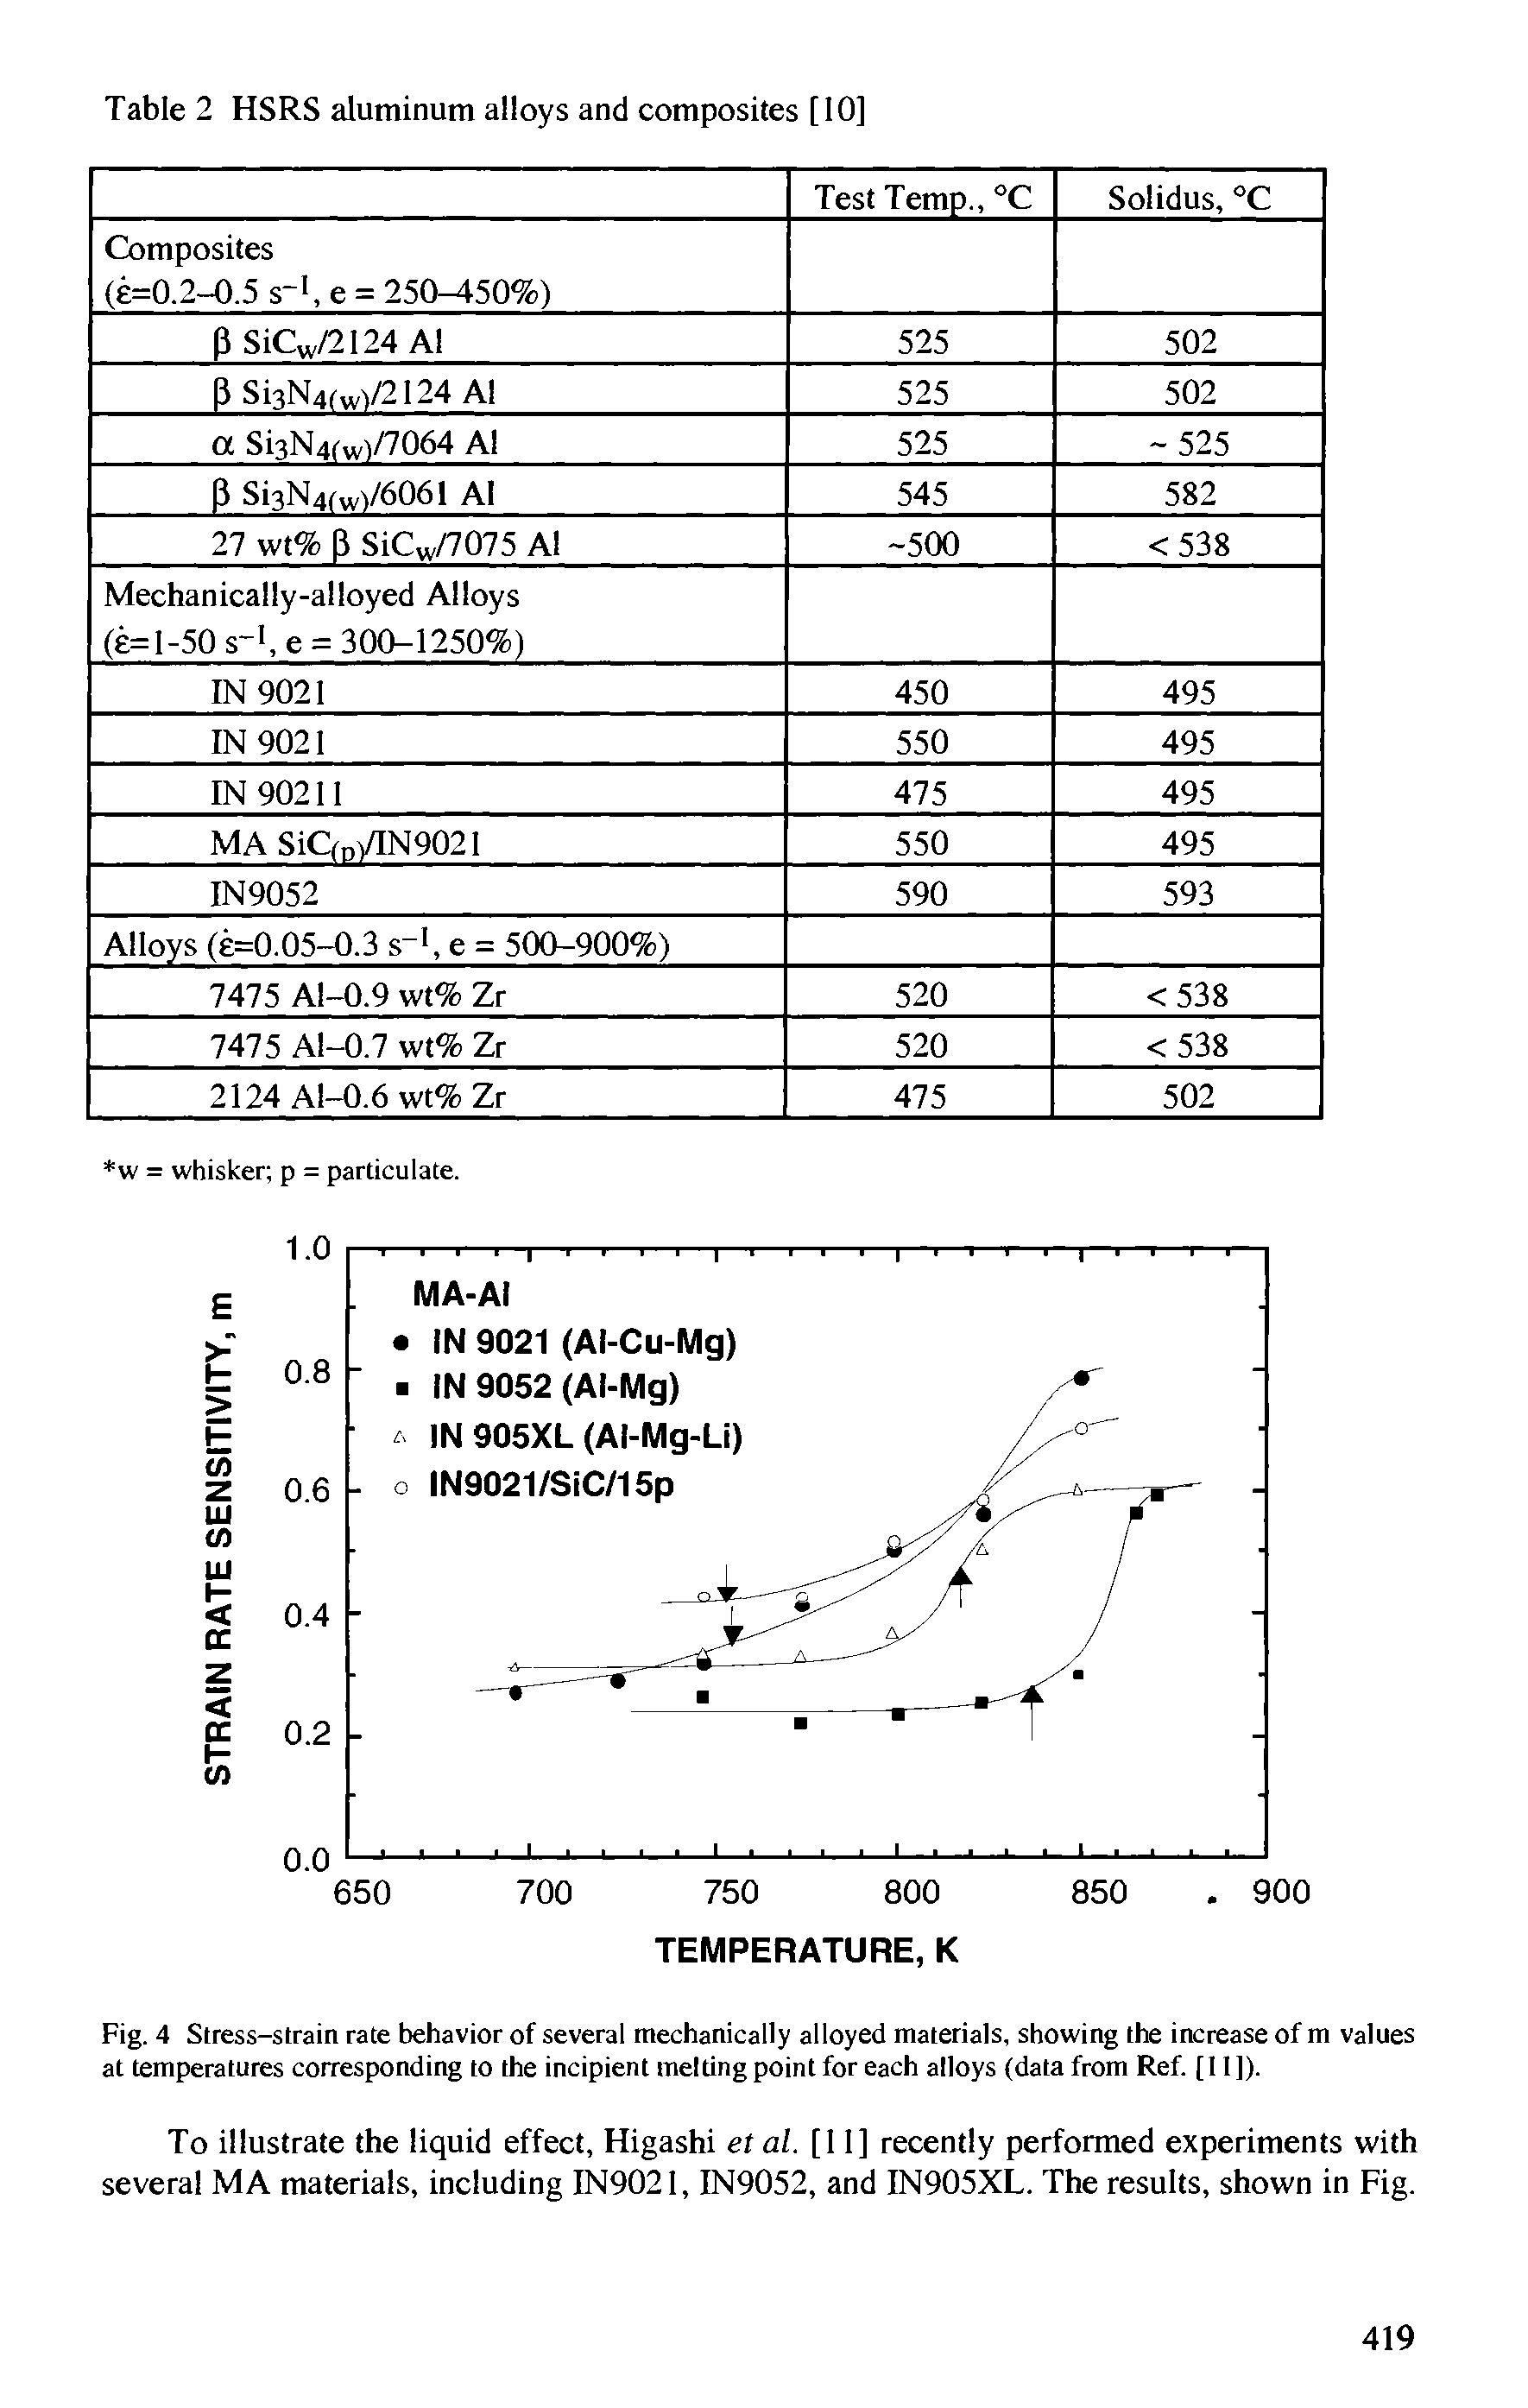 Fig. 4 Stress-strain rate behavior of several mechanically alloyed materials, showing the increase of m values at temperatures corresponding to the incipient melting point for each alloys (data from Ref. [11]).